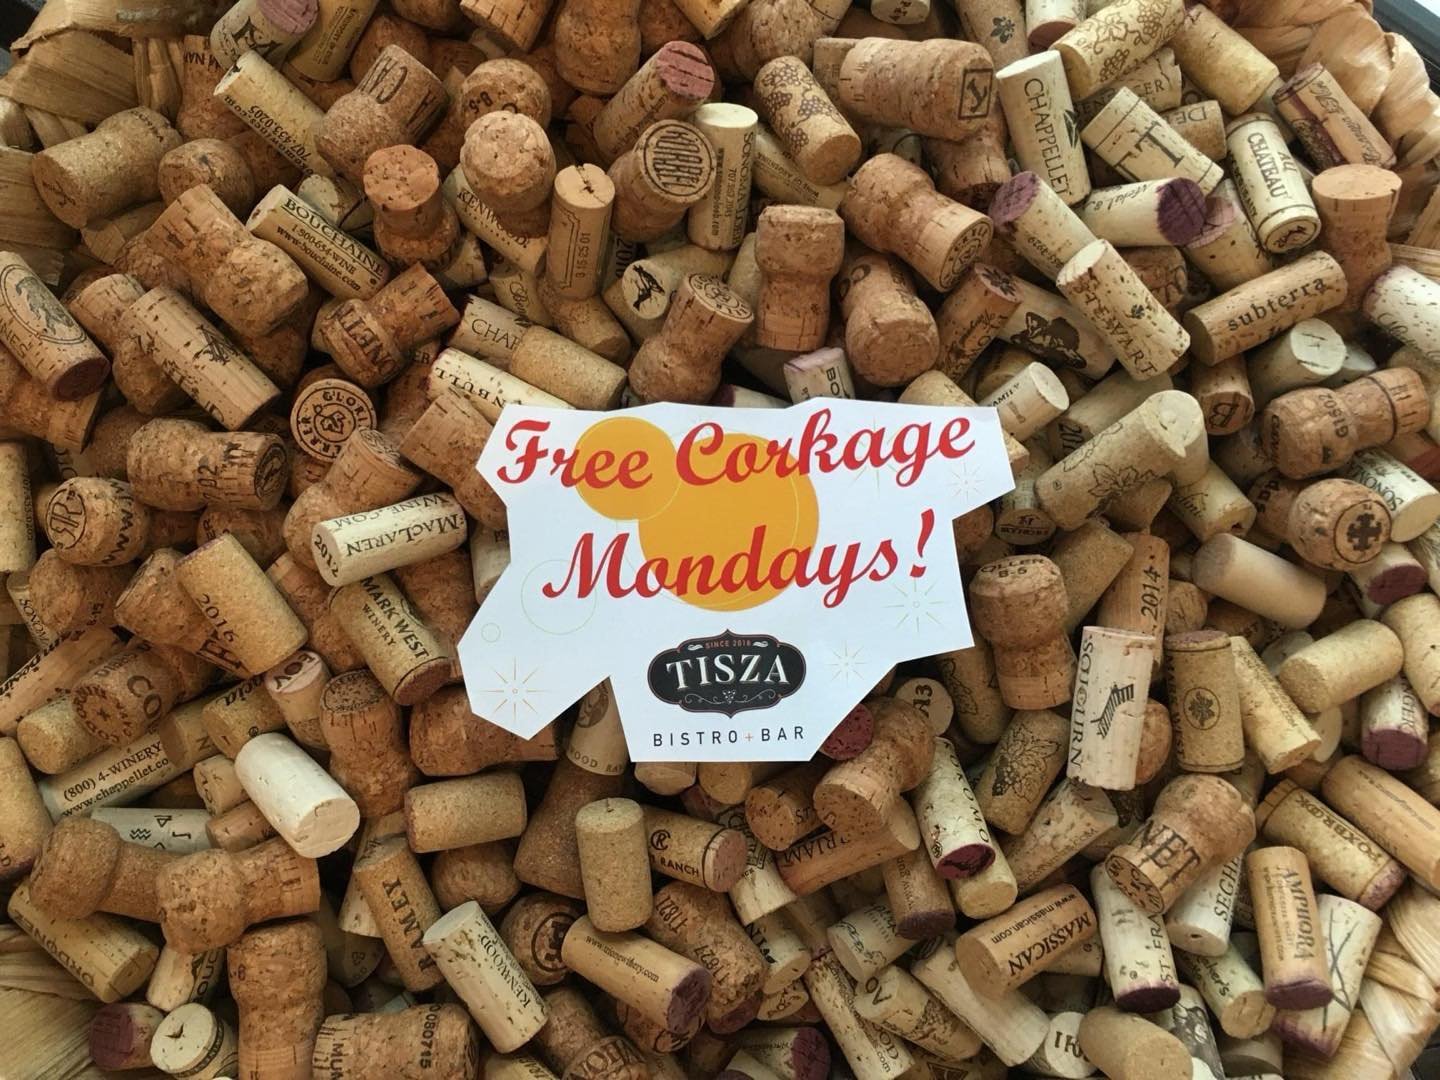 Free Corkage on Mondays! Plus we offer Chef&rsquo;s choice 3- course dinner menu for $45 per person. Make your reservations at tiszabistro.com  #sonomacounty #healdsburg #healdsburgrestaurant 
#winecountry
#shophealdsburg
#sonomawinecountry